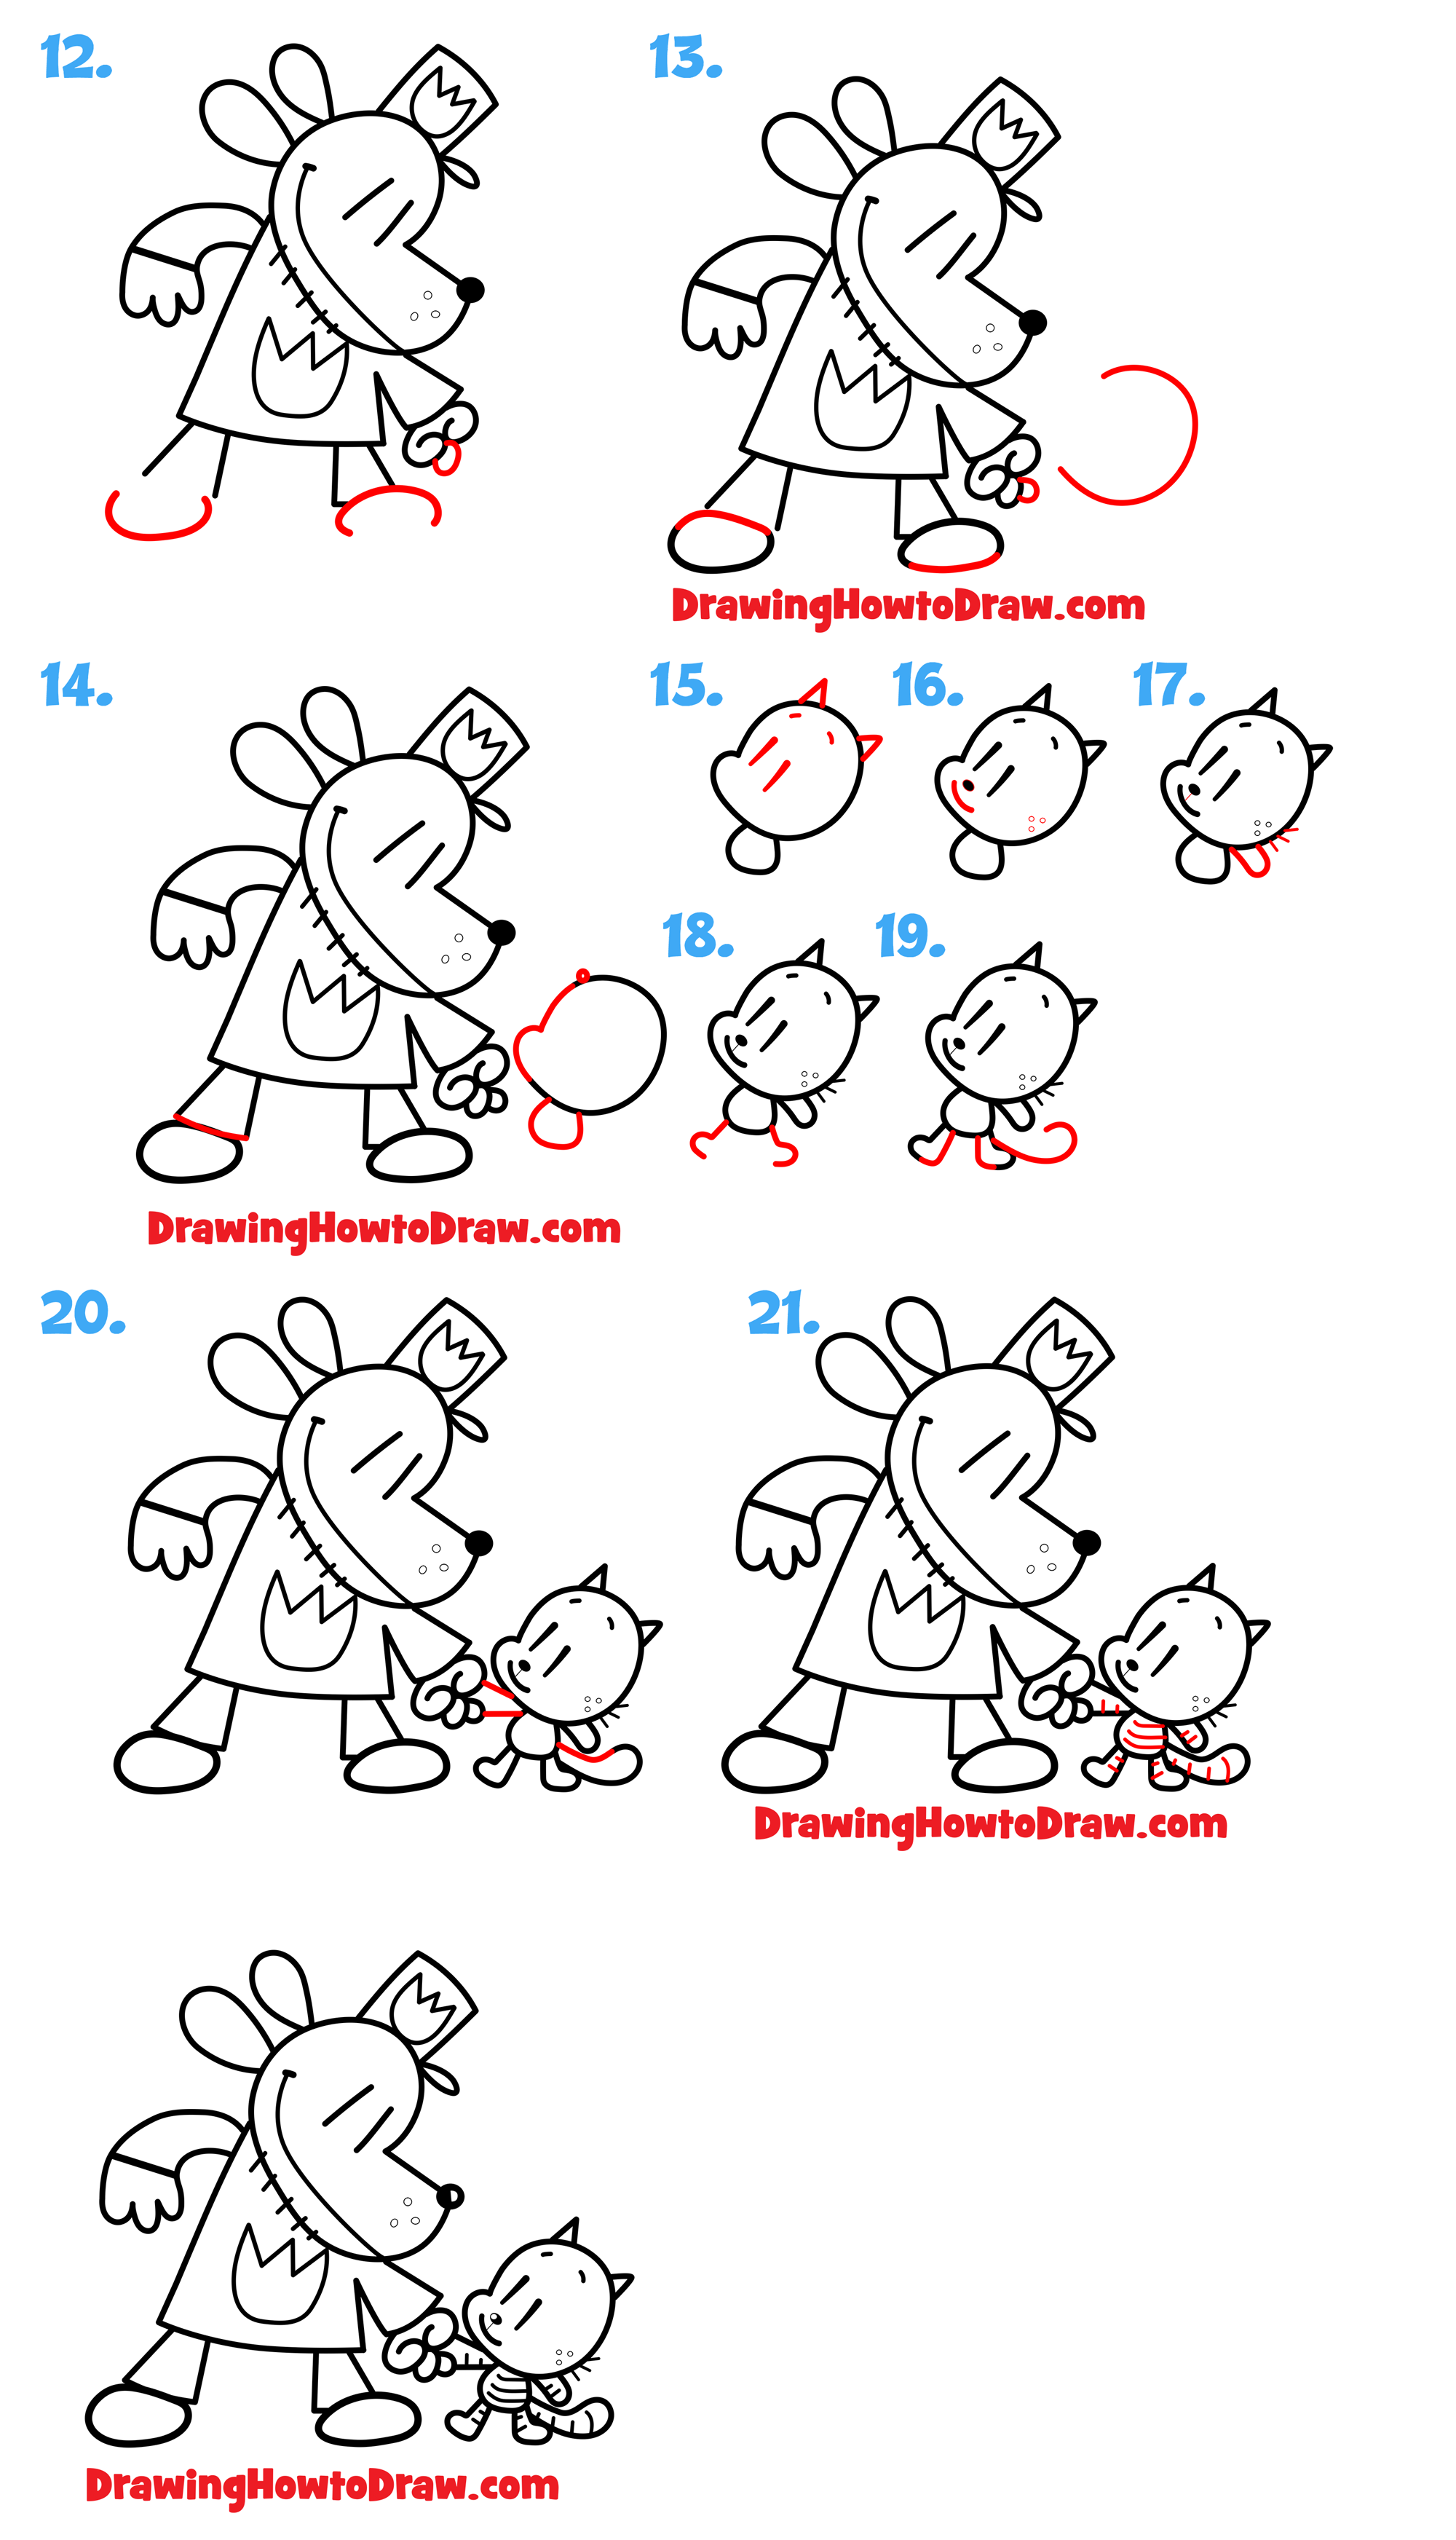 How to Draw Dog Man and Cat Kid Holding Hands with Easy Step-by-Step Drawing Tutorial for Kids